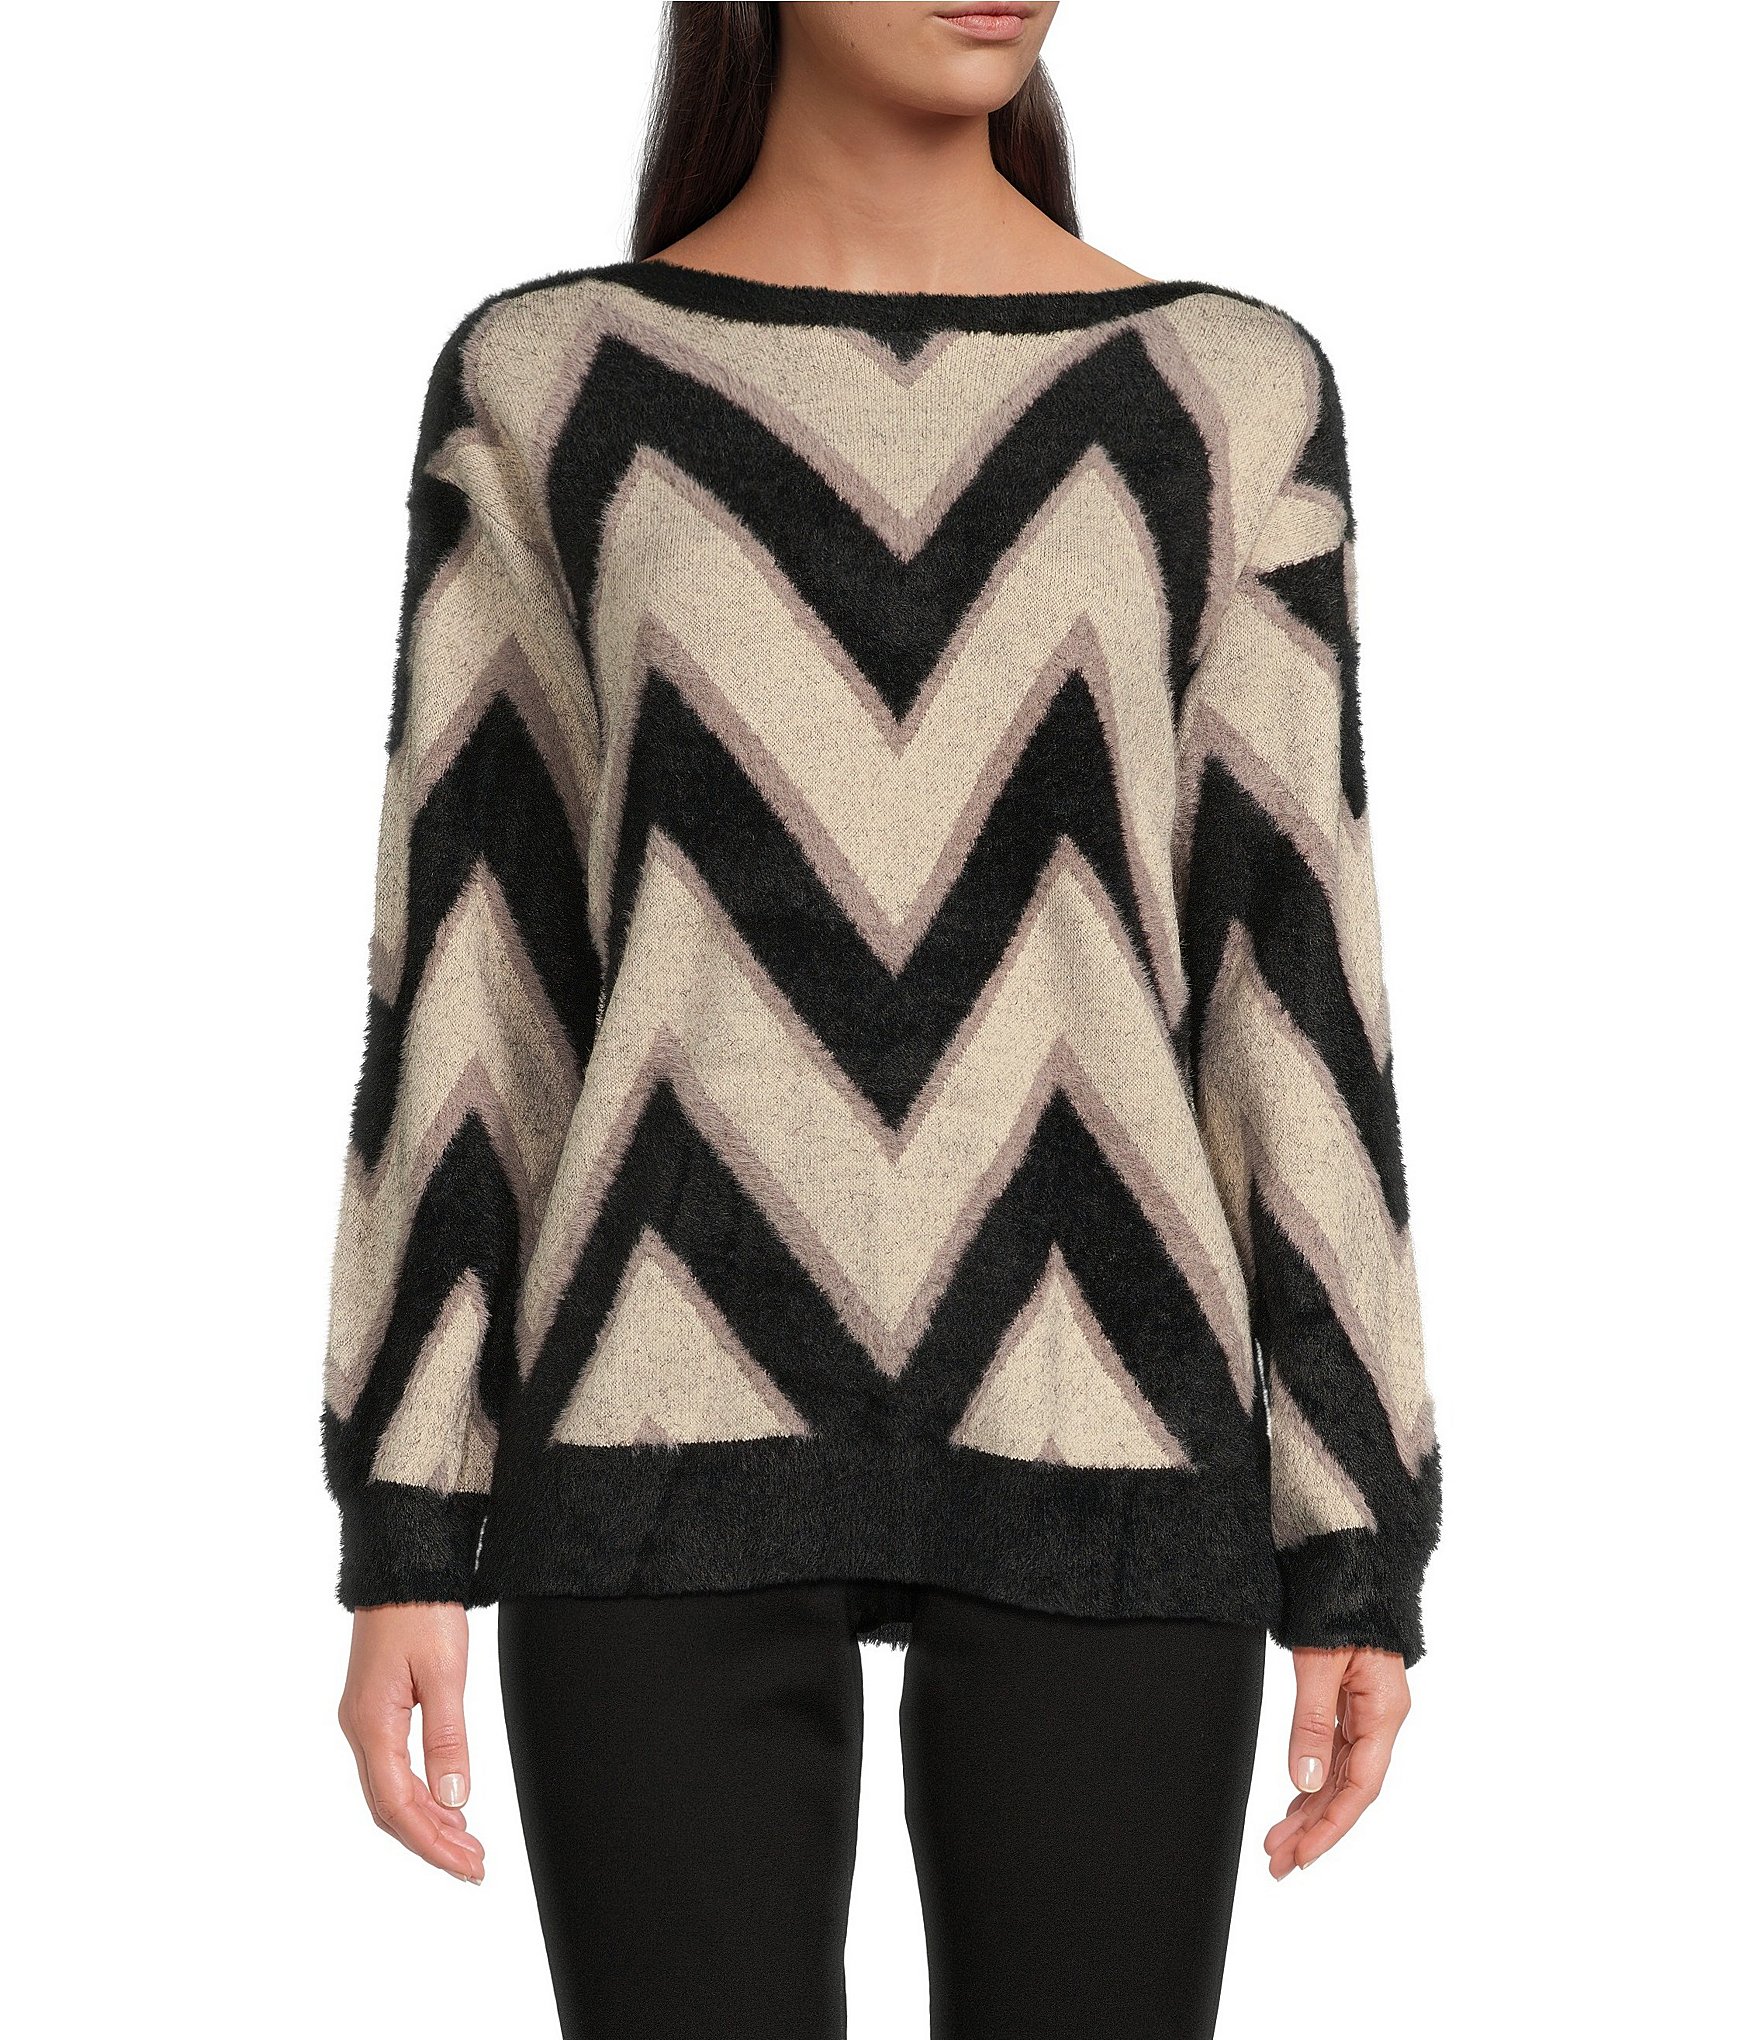 Tru Luxe Jeans Chevron Jacquard Boat Neck Ribbed Cuff Sleeve Sweater ...